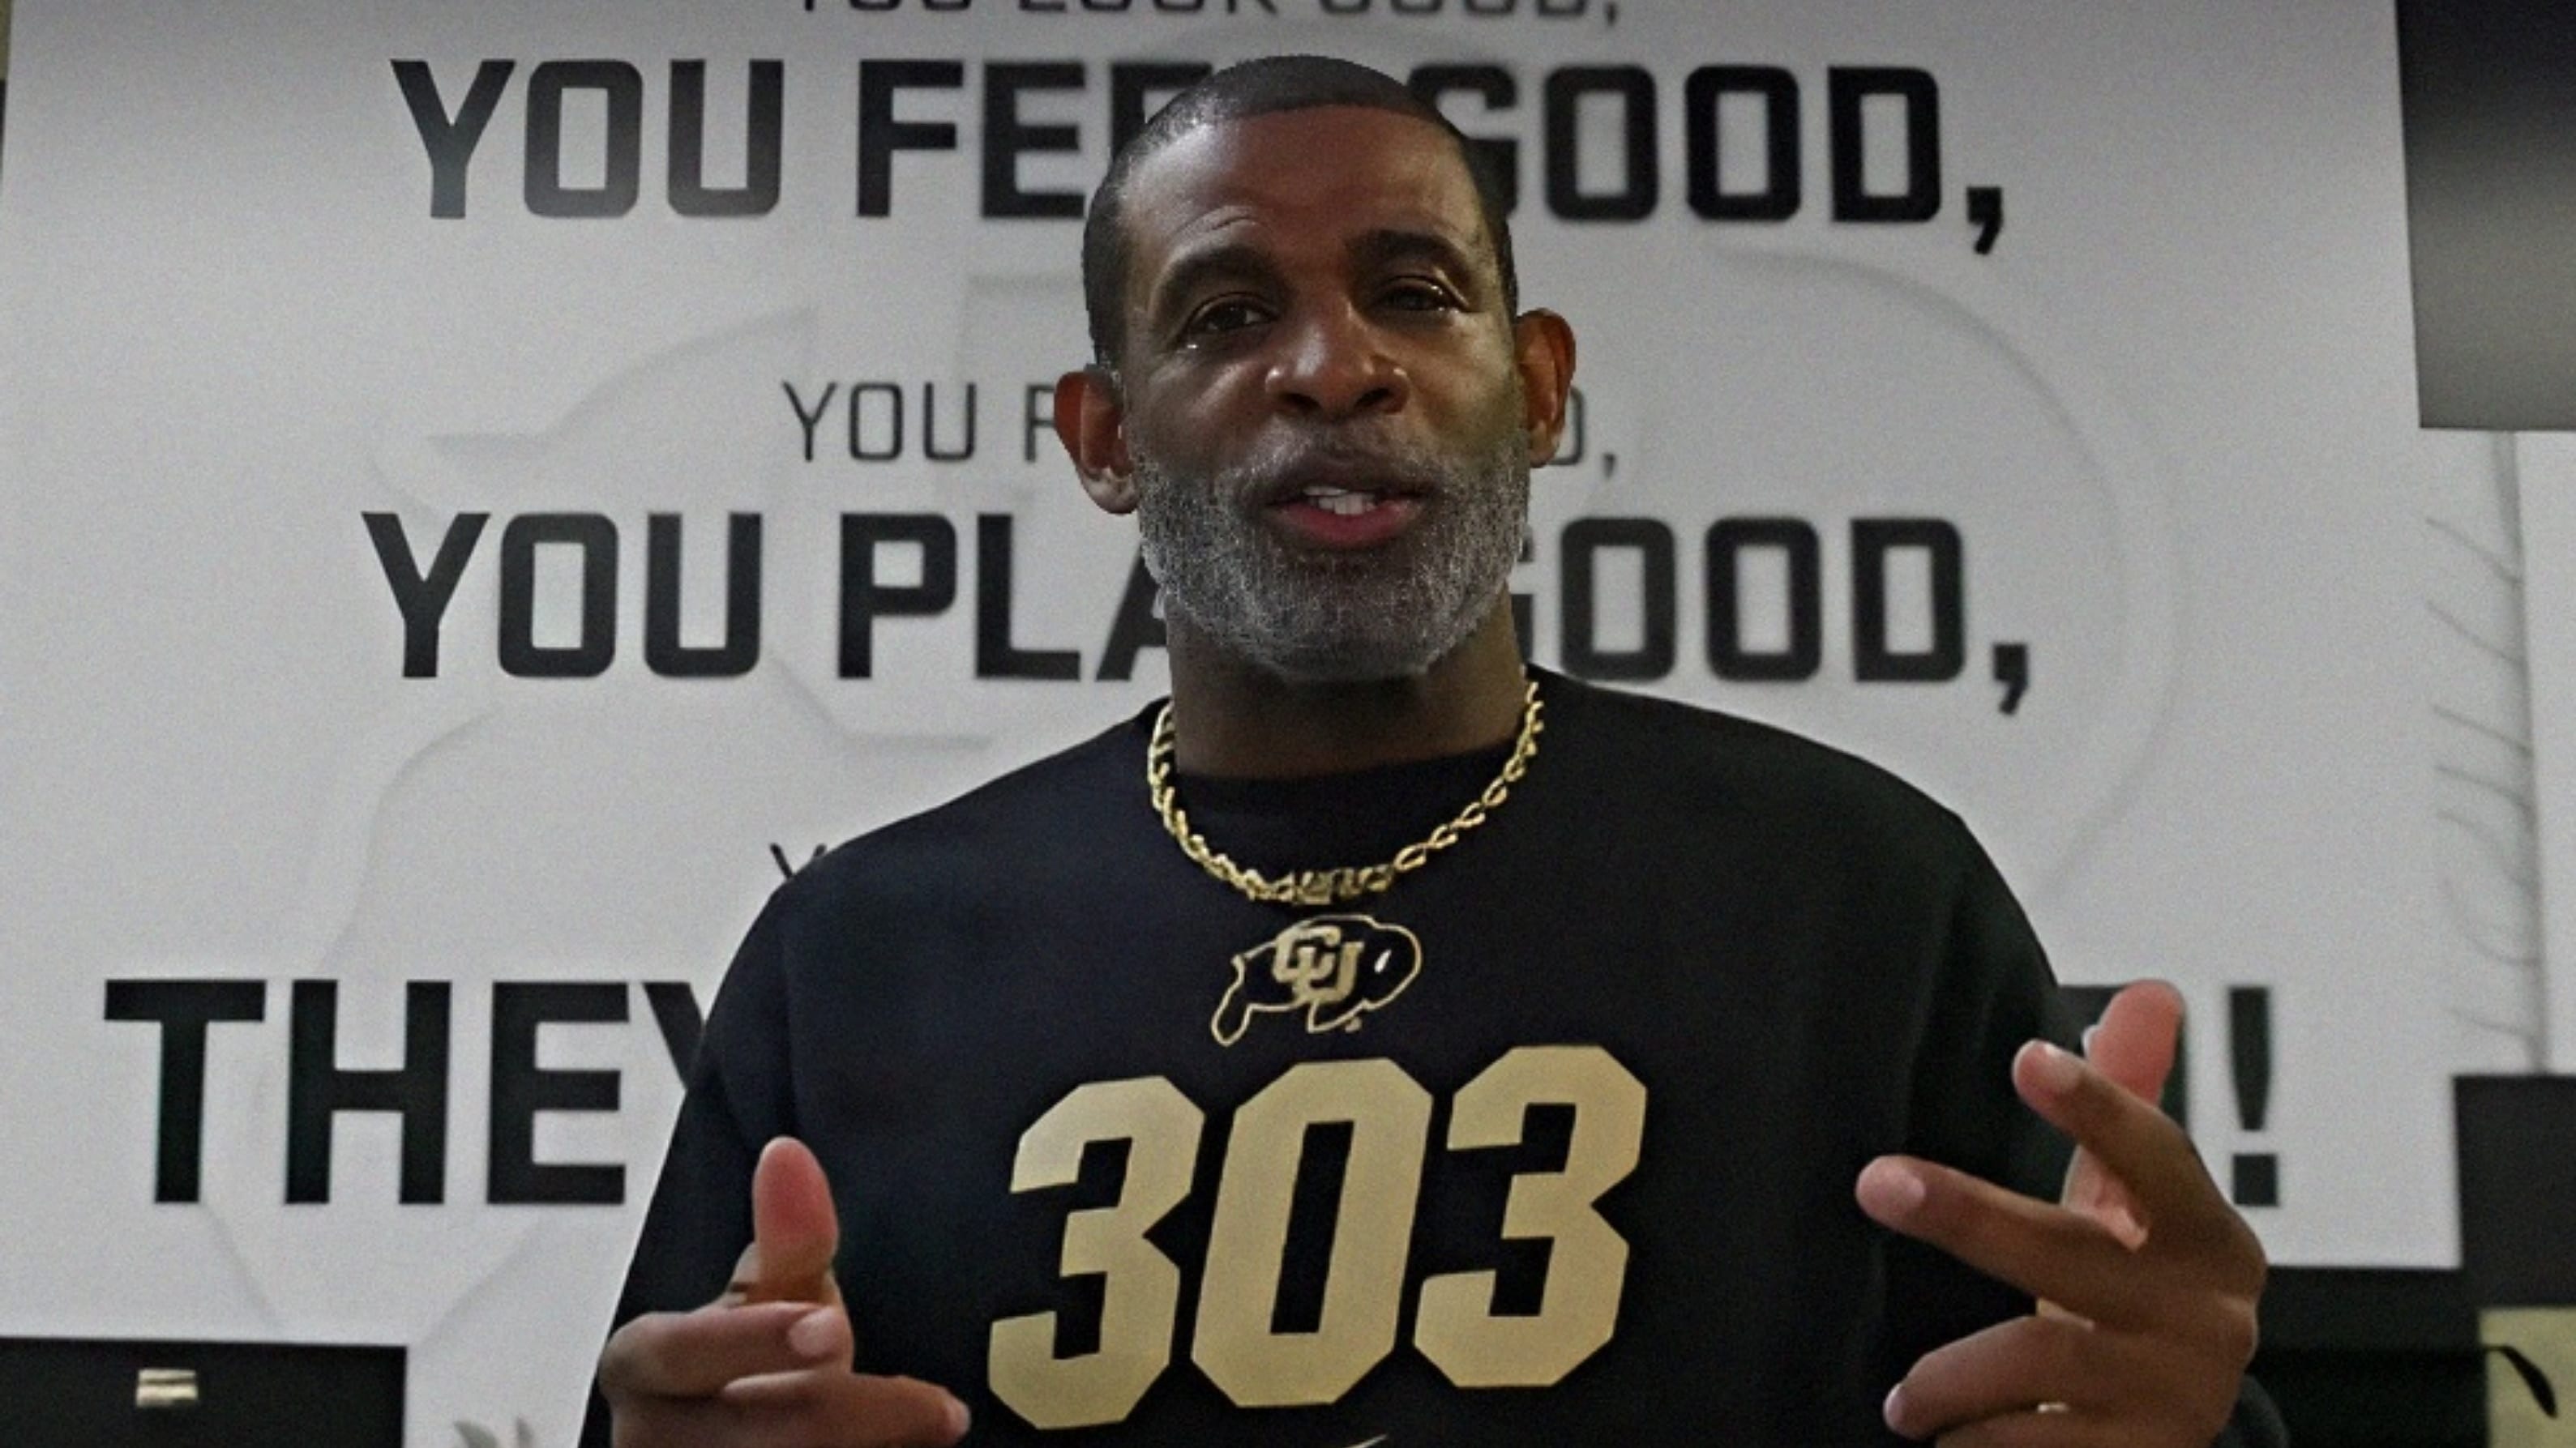 Deion Sanders rips players after receiving letter from CU professor